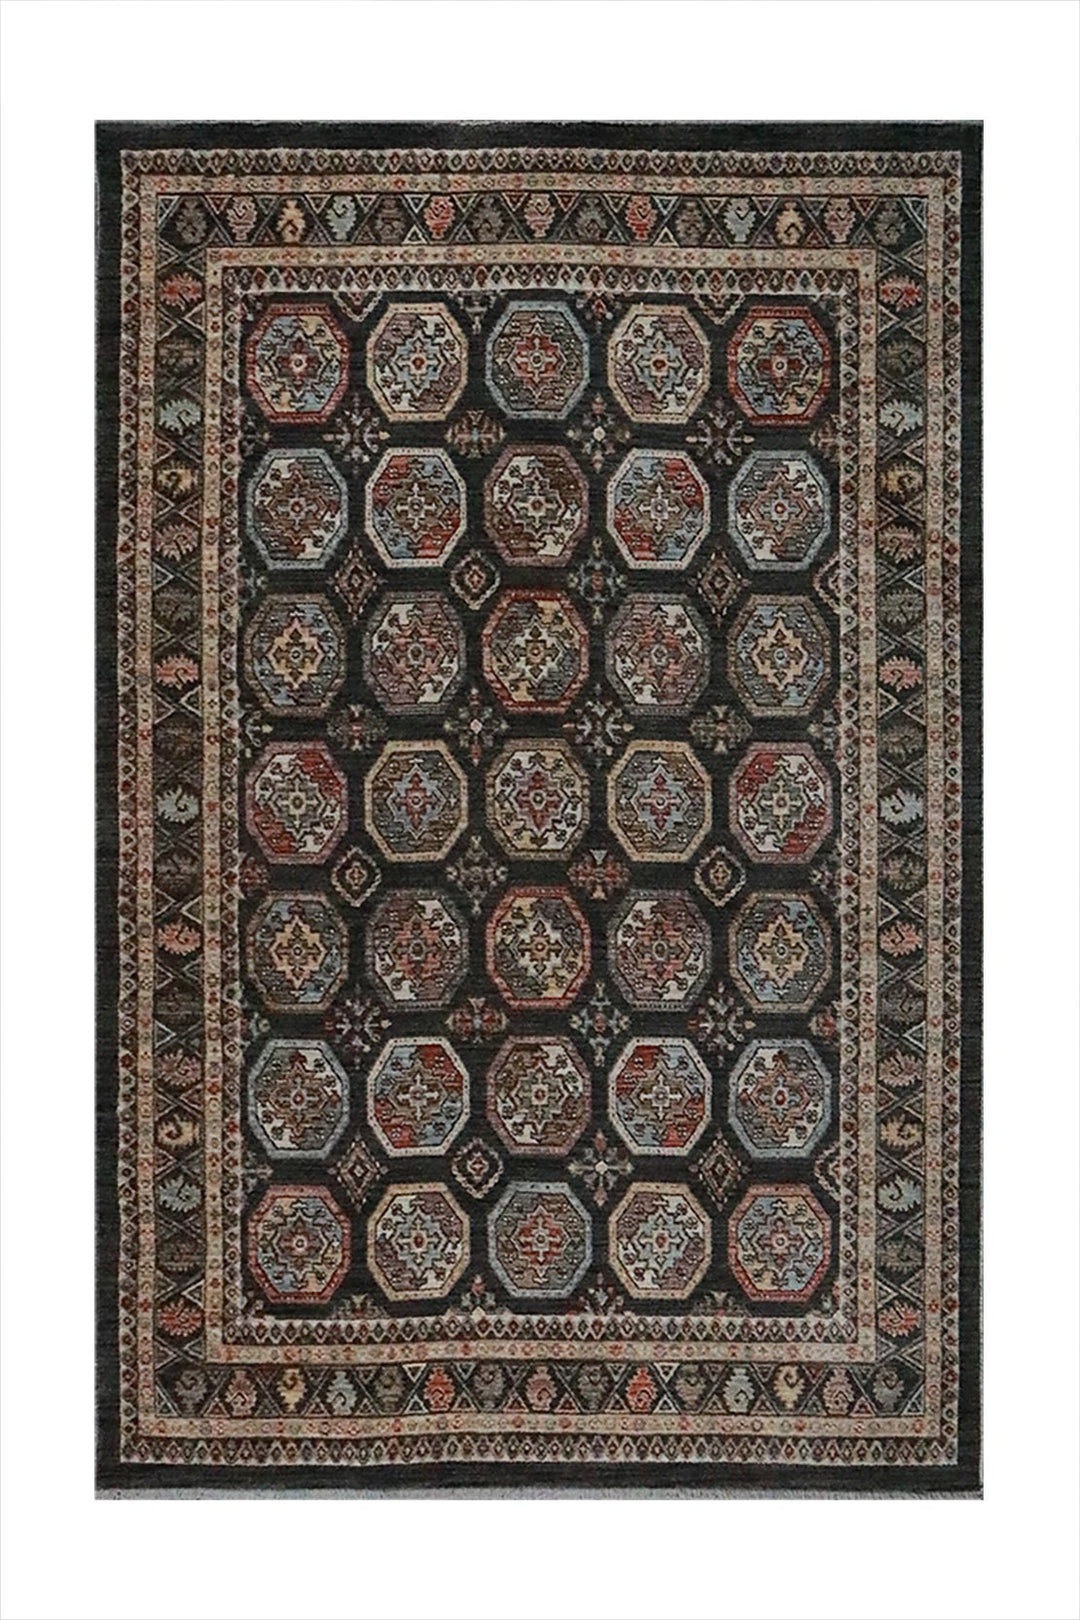 Premium Quality Turkish Antia Rug - 3.9 x 5.9 FT - Brown - Resilient Construction for Long-Lasting Use - V Surfaces